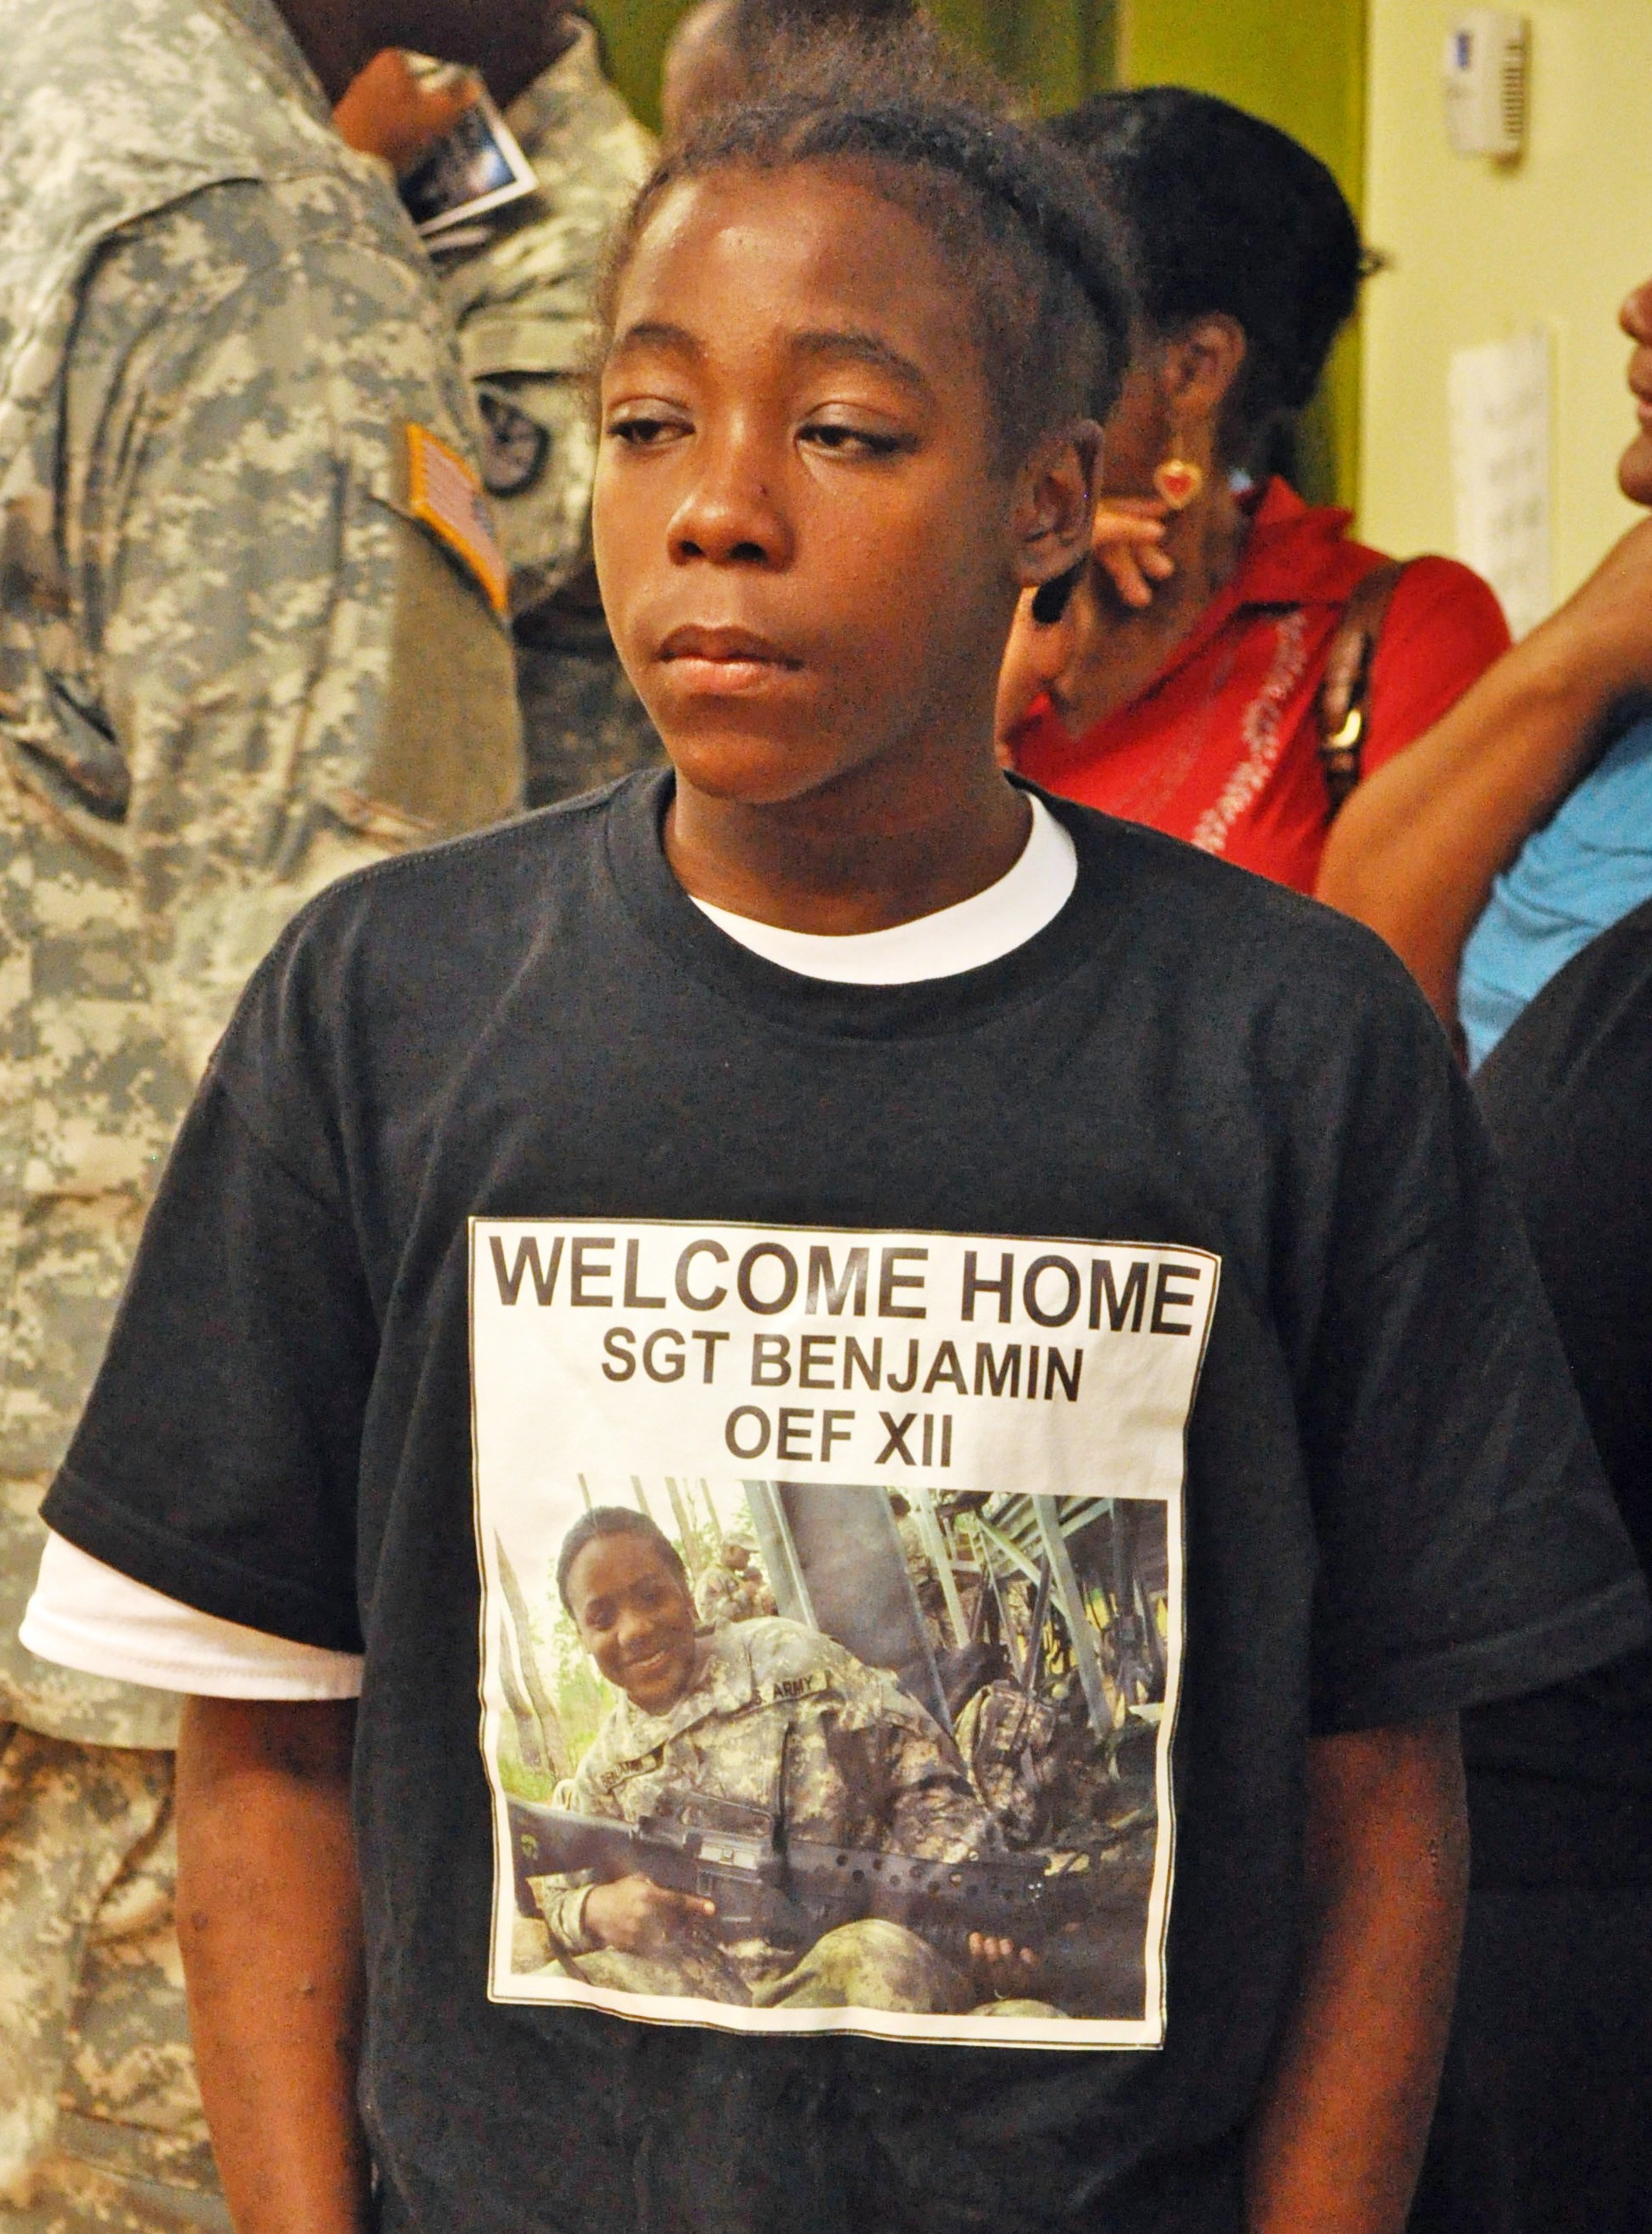 Joseph Harris, 15, waits to greet his sister, V.I. Guardswoman Asheba Benjamin. Seven members of Benjamin's welcoming party wore T-shirts the same as this one. The back read, "At Ease."